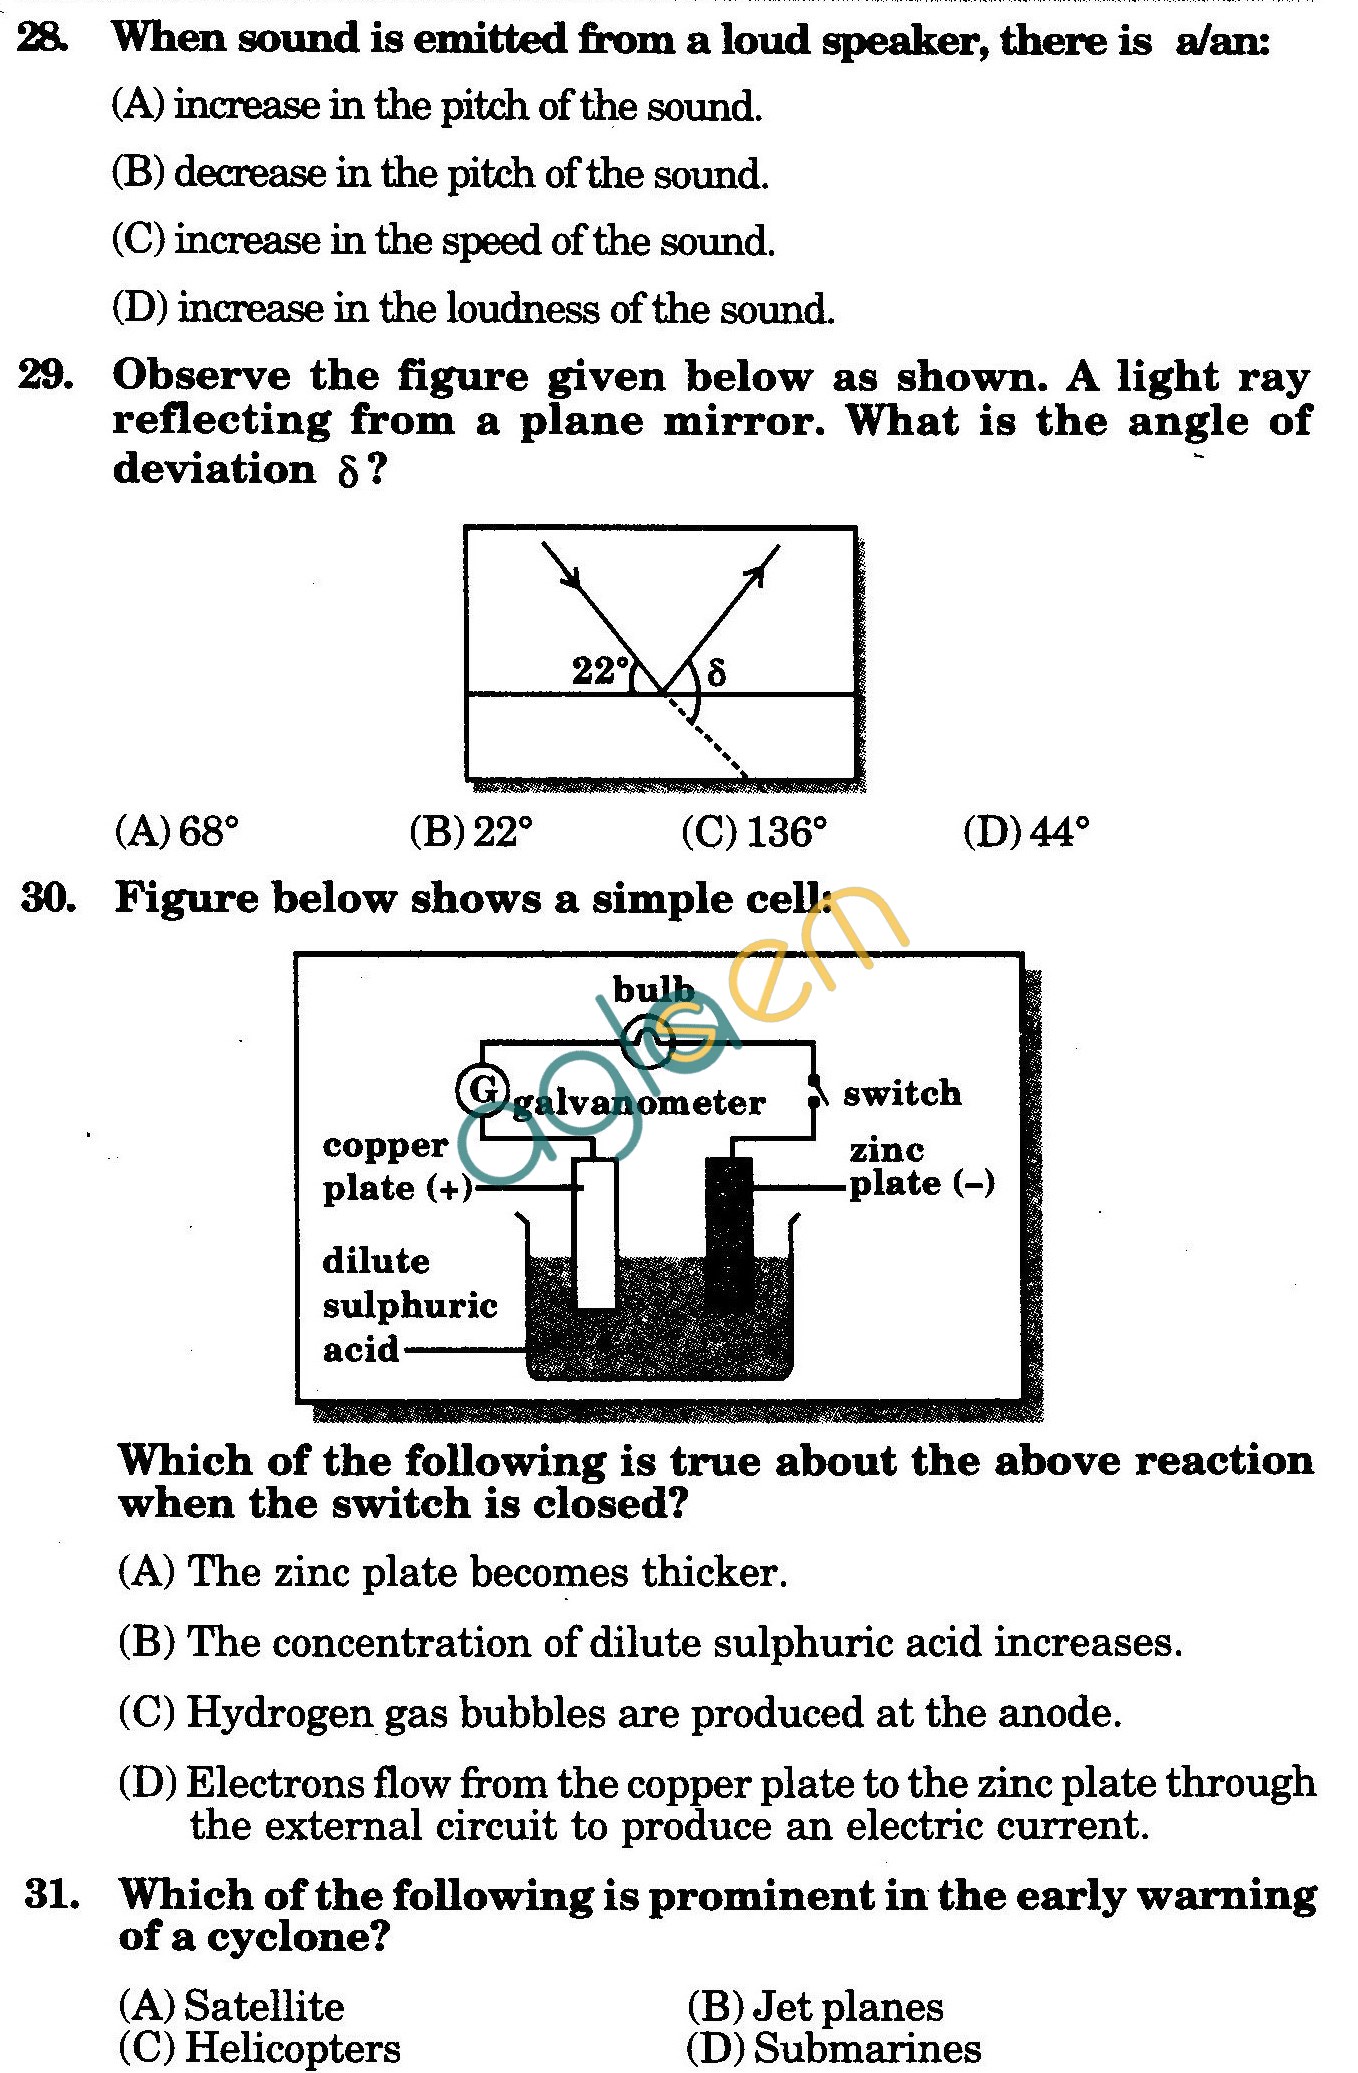 NSTSE 2010: Class VIII Question Paper with Answers - Physics